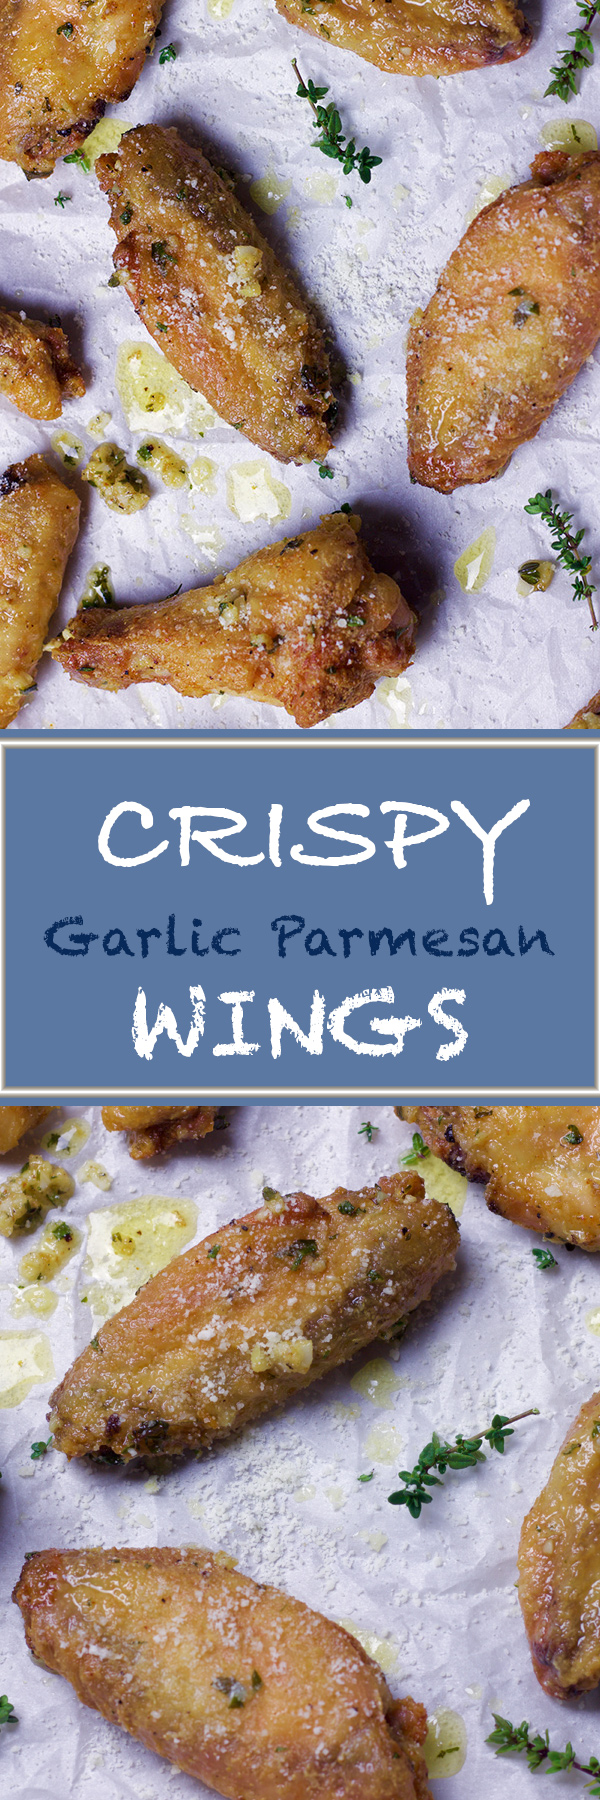 These baked crispy parmesan chicken wings taste like they are fried. With this recipe you get to cut down on the fat and still enjoy all the flavor.